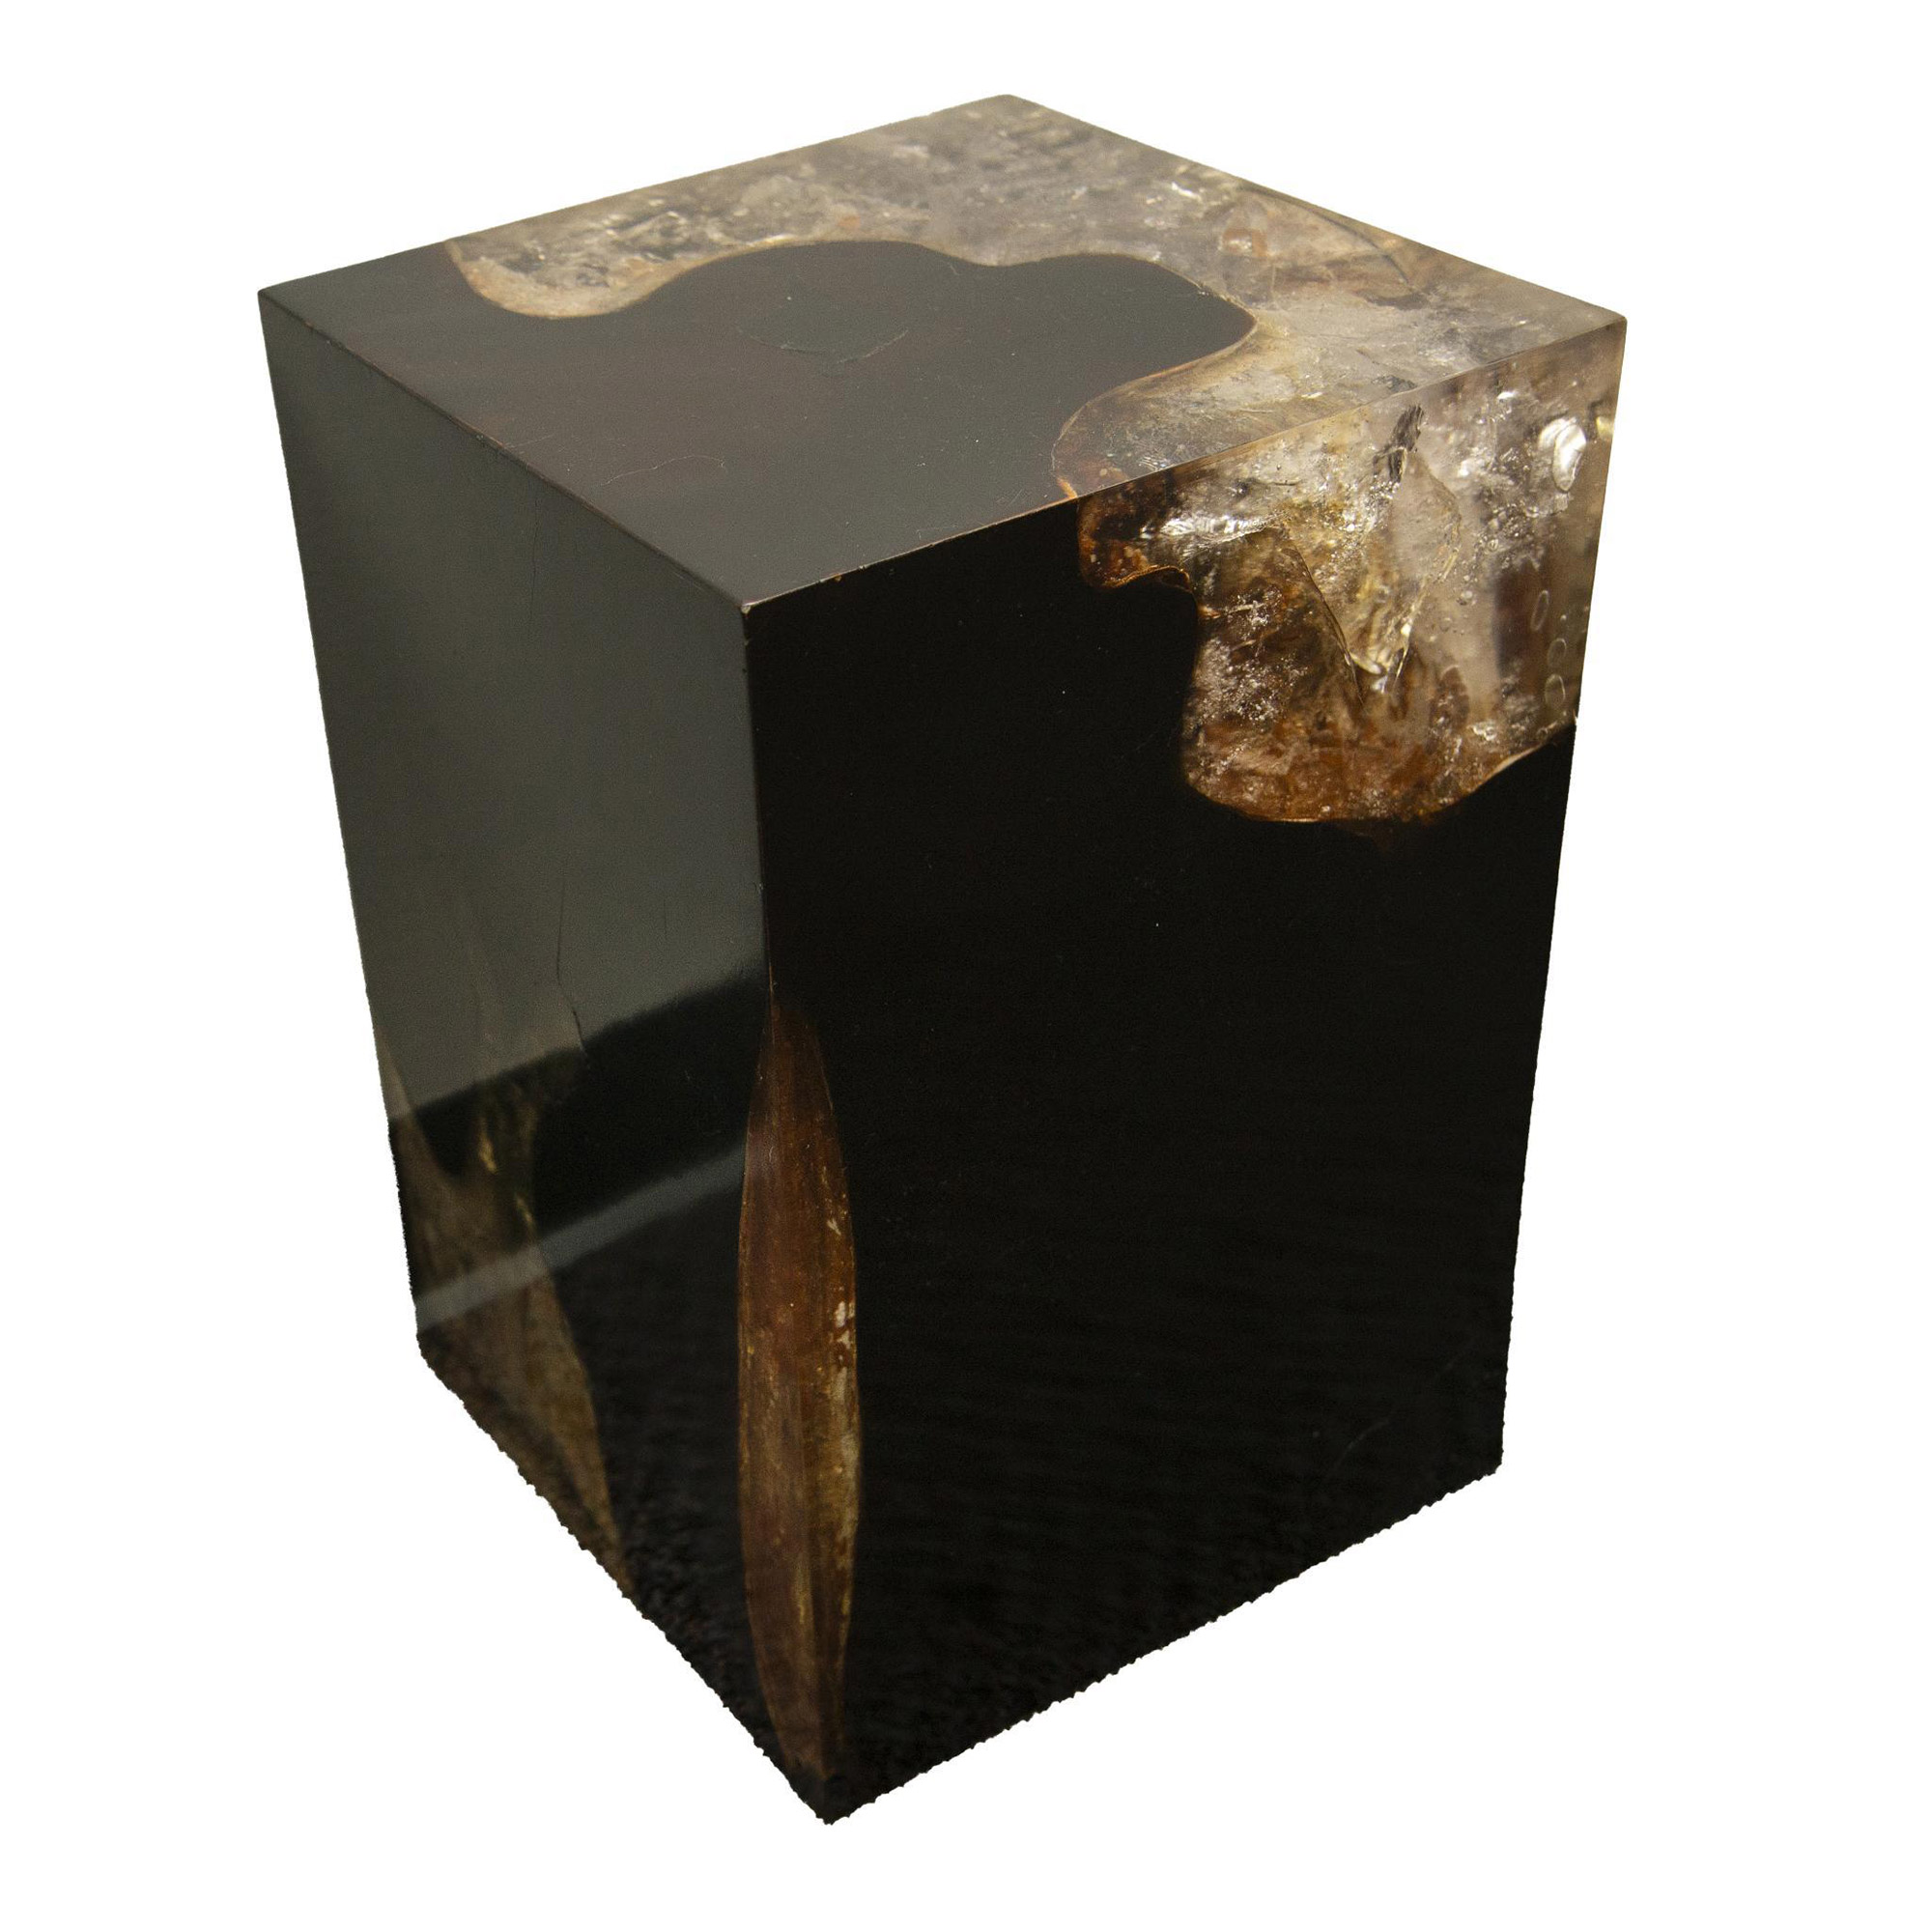 Andrianna Shamaris Cracked Resin Side Table - Image 4 of 4